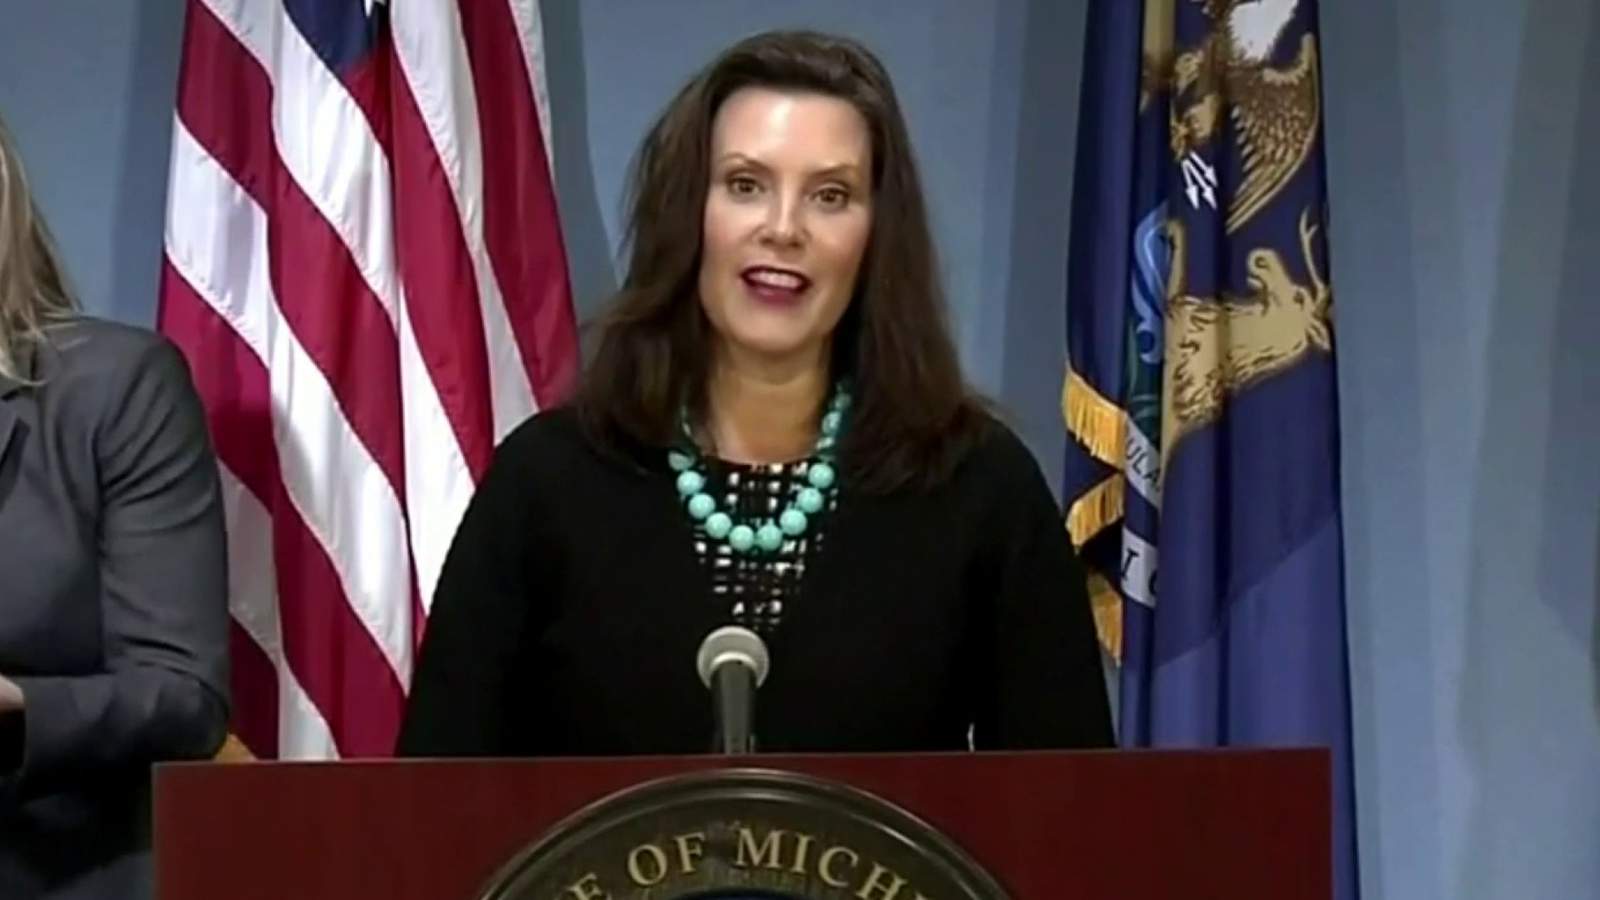 Gov. Whitmer warns Michigan will have to take steps backward if COVID-19 numbers spike